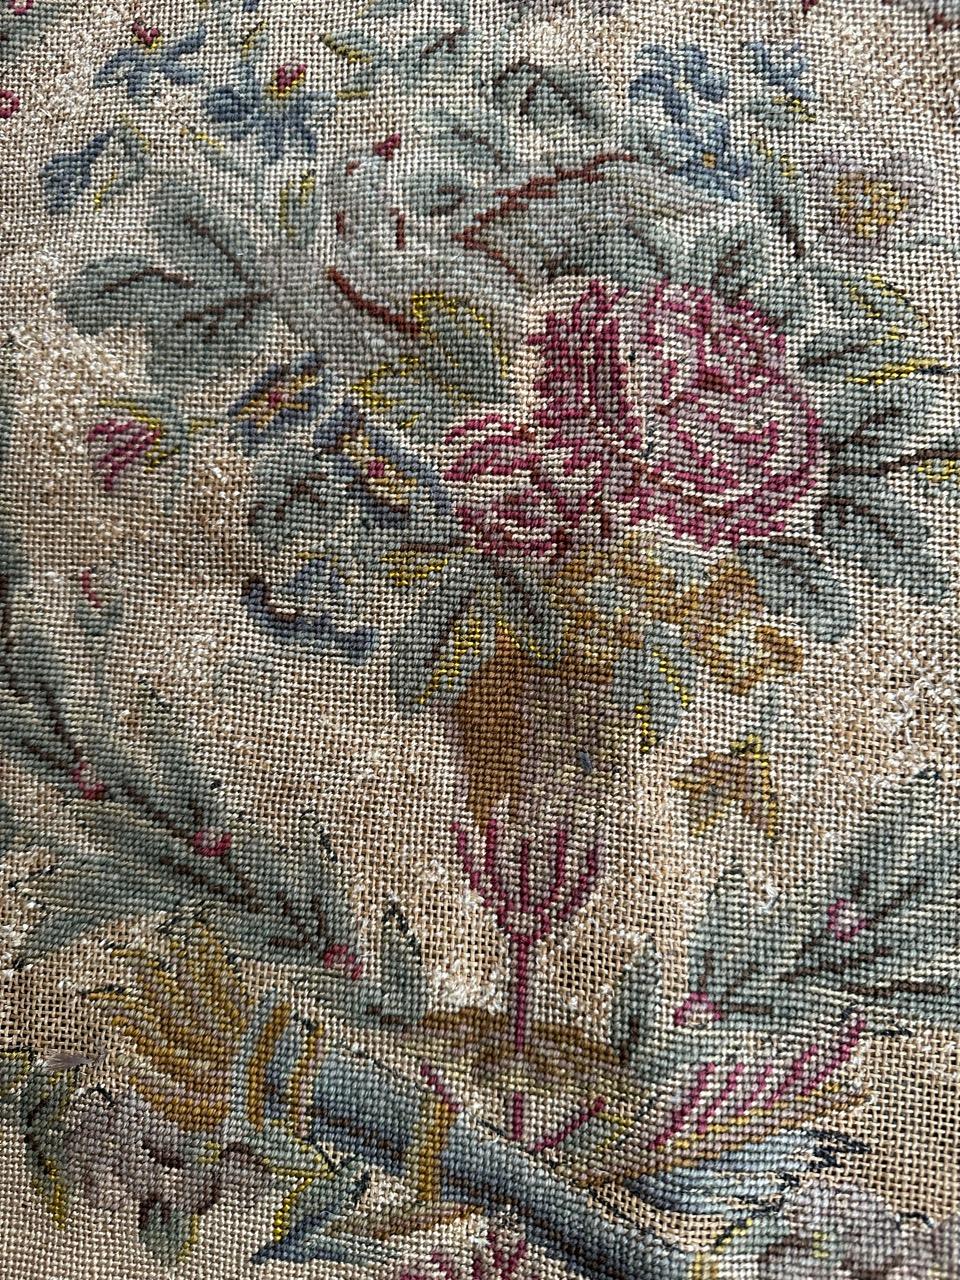 Needlepoint Bobyrug’s pretty antique French needlepoint chair cover tapestry  For Sale